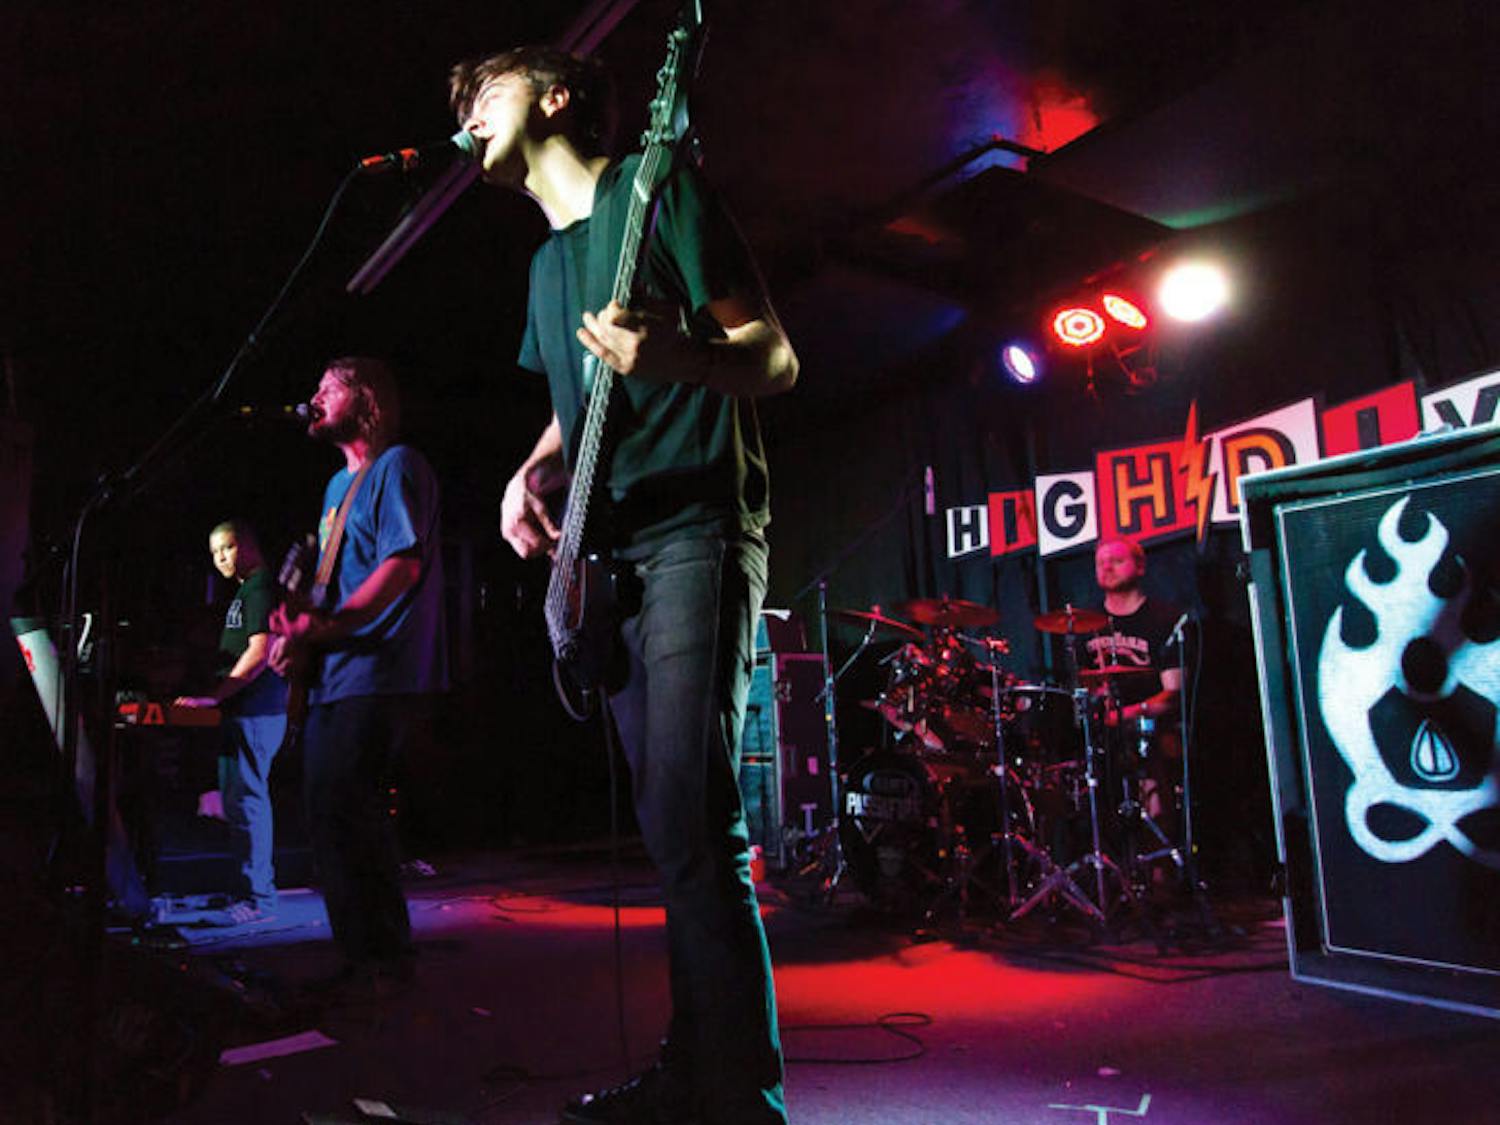 Passafire, a reggae rock band based in Savannah, Ga., performs at High Dive on Thursday night.